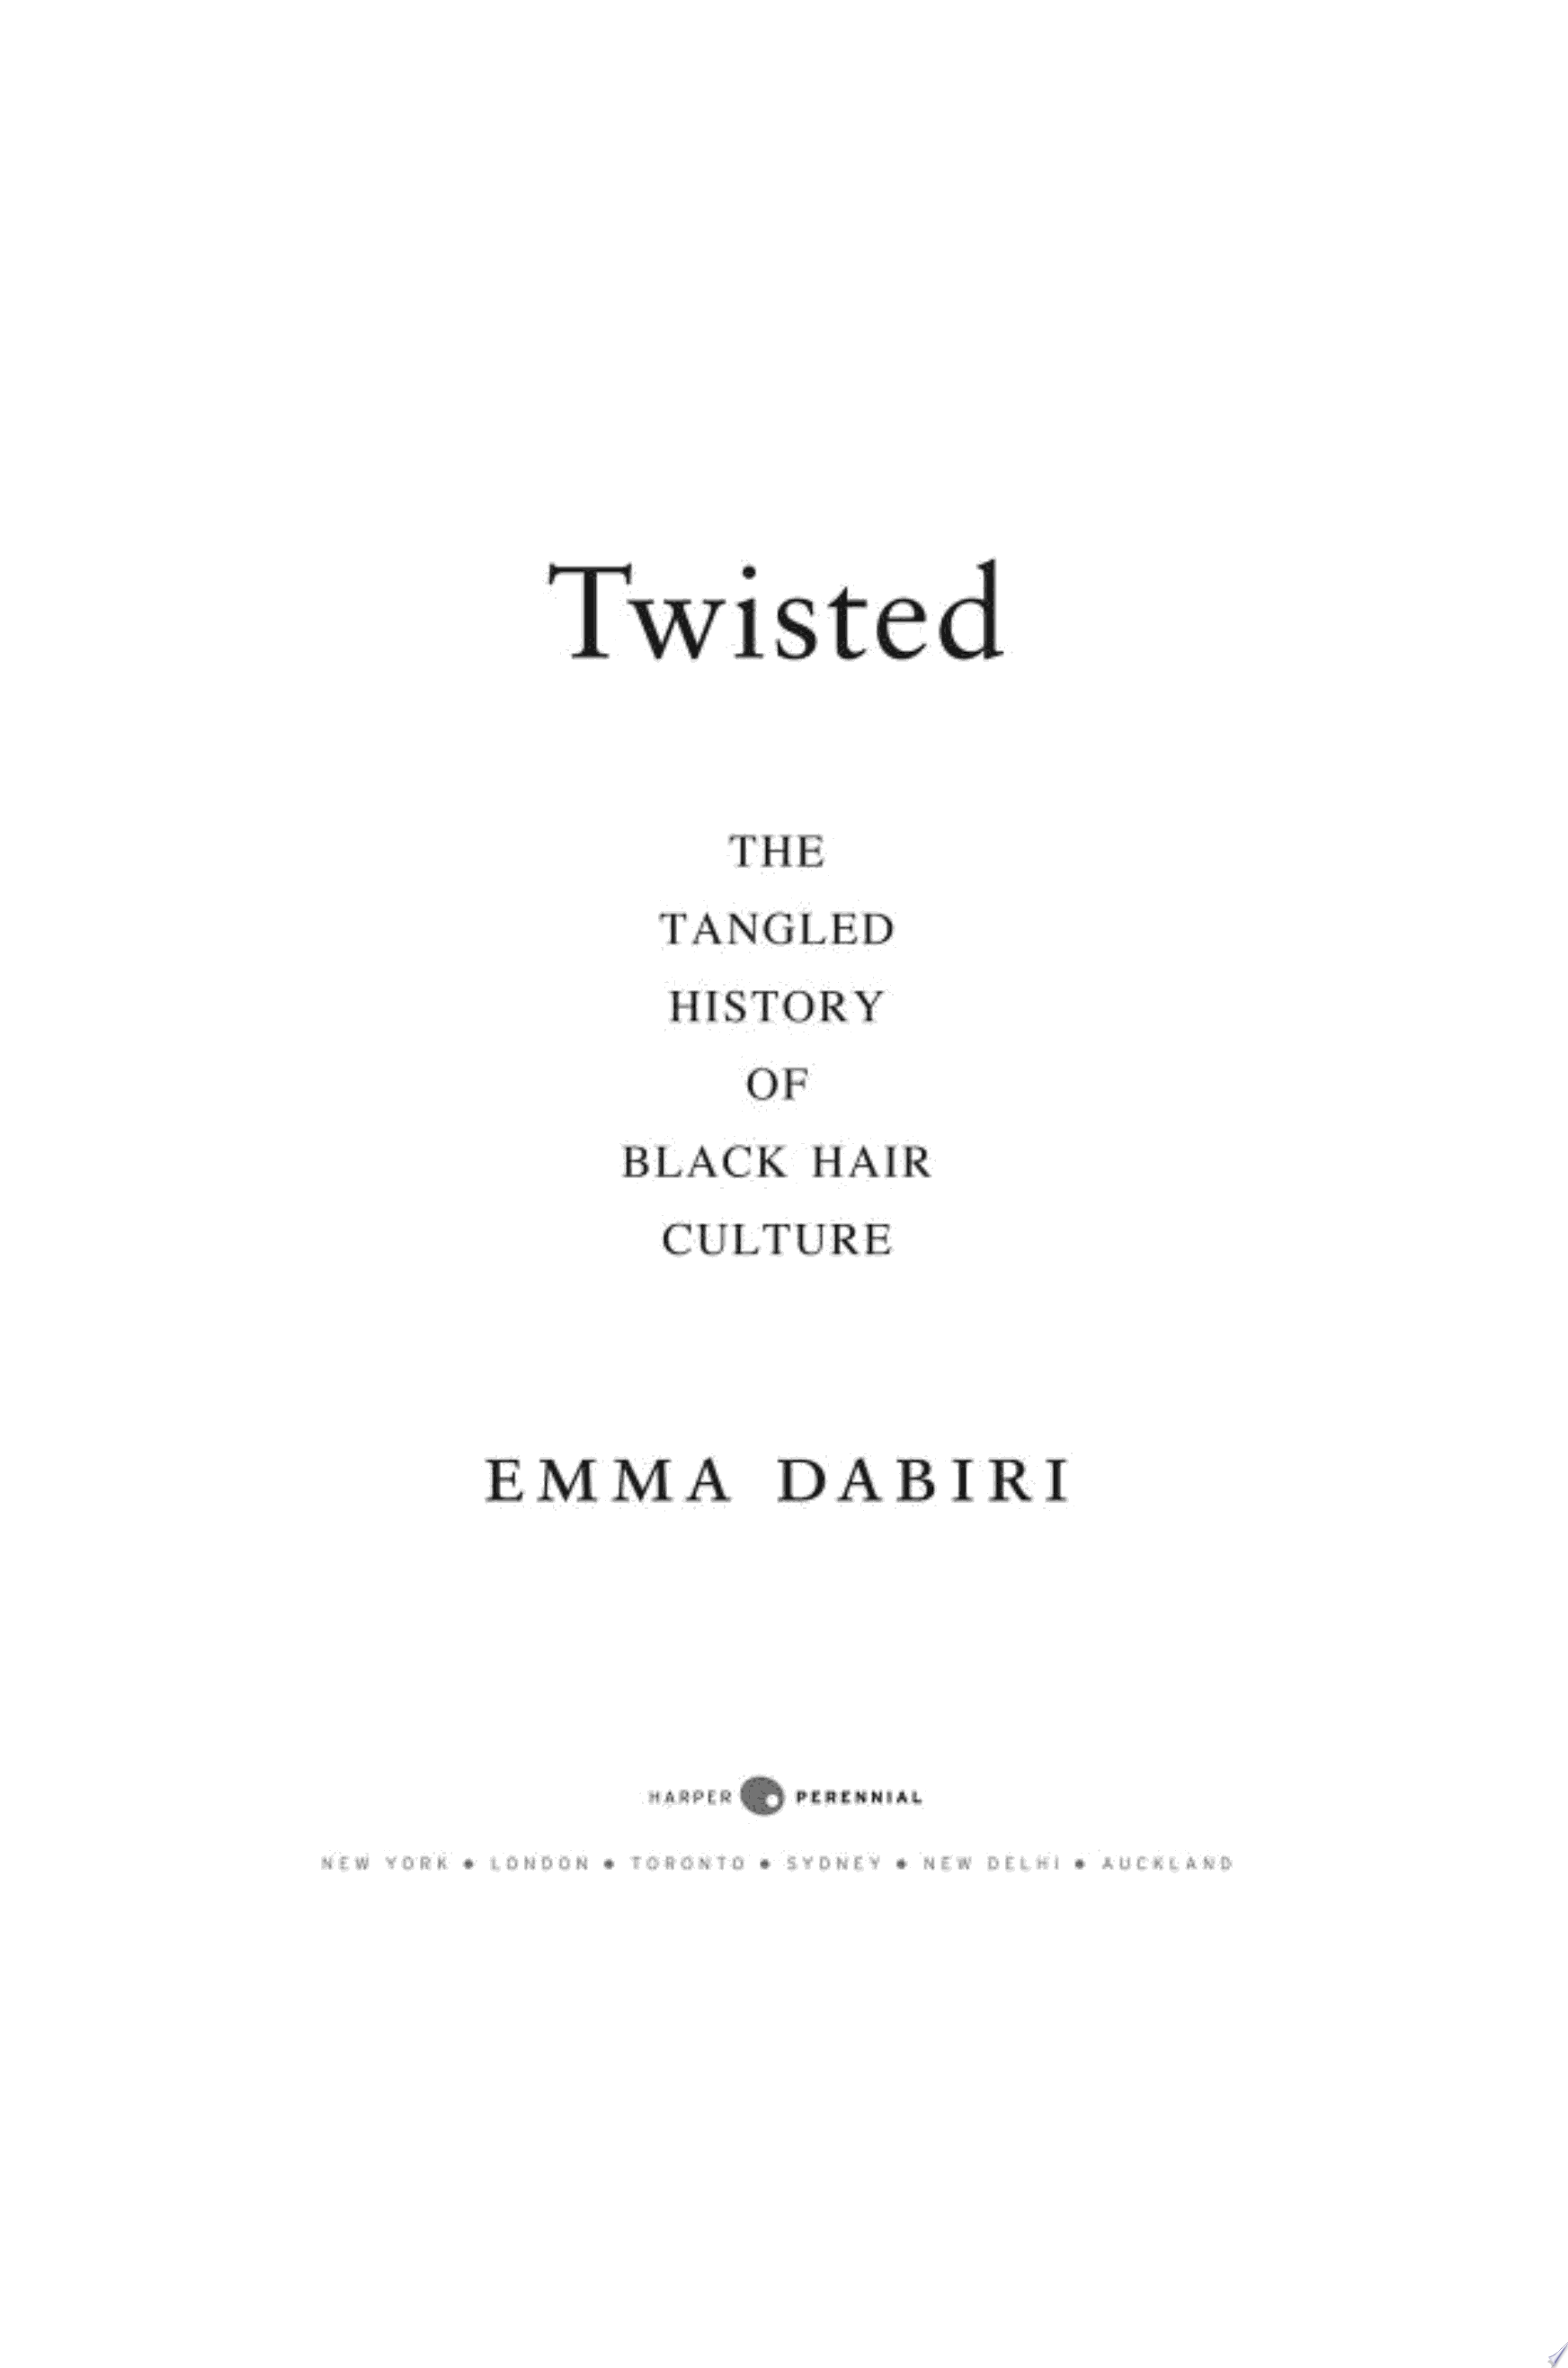 Image for "Twisted"